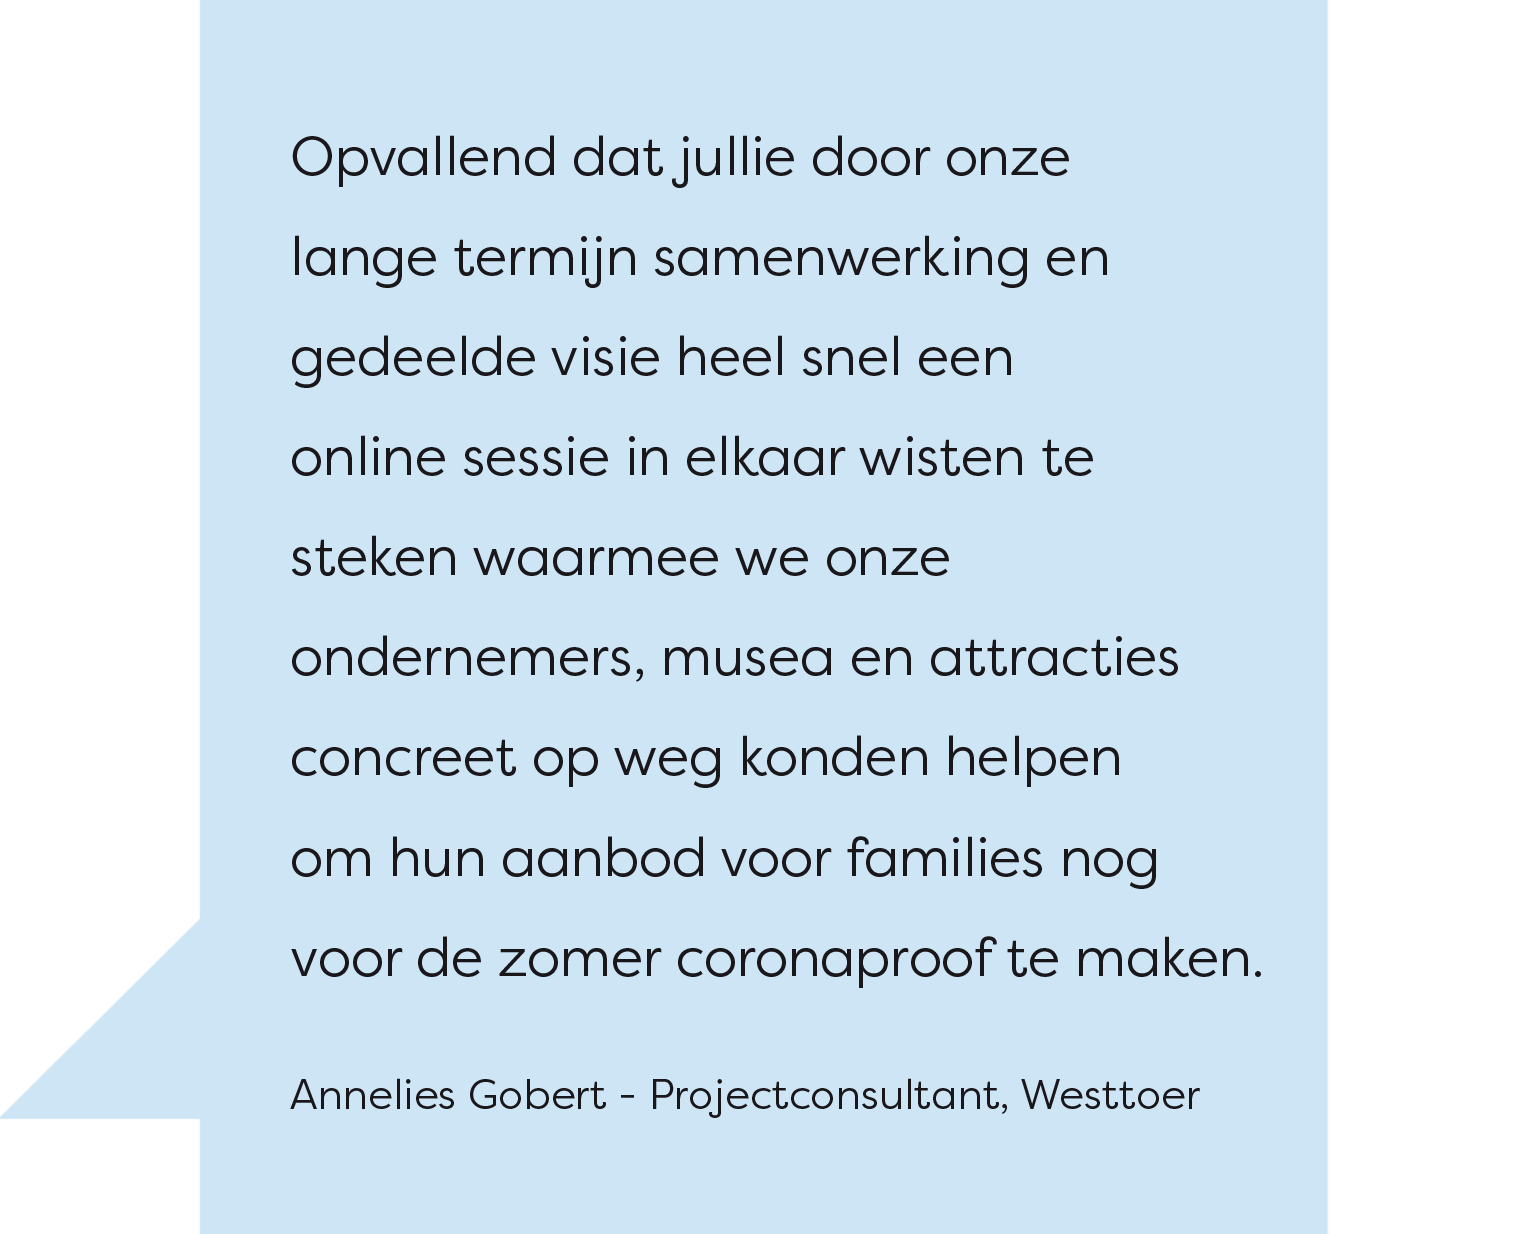 annelies quote webinar.png